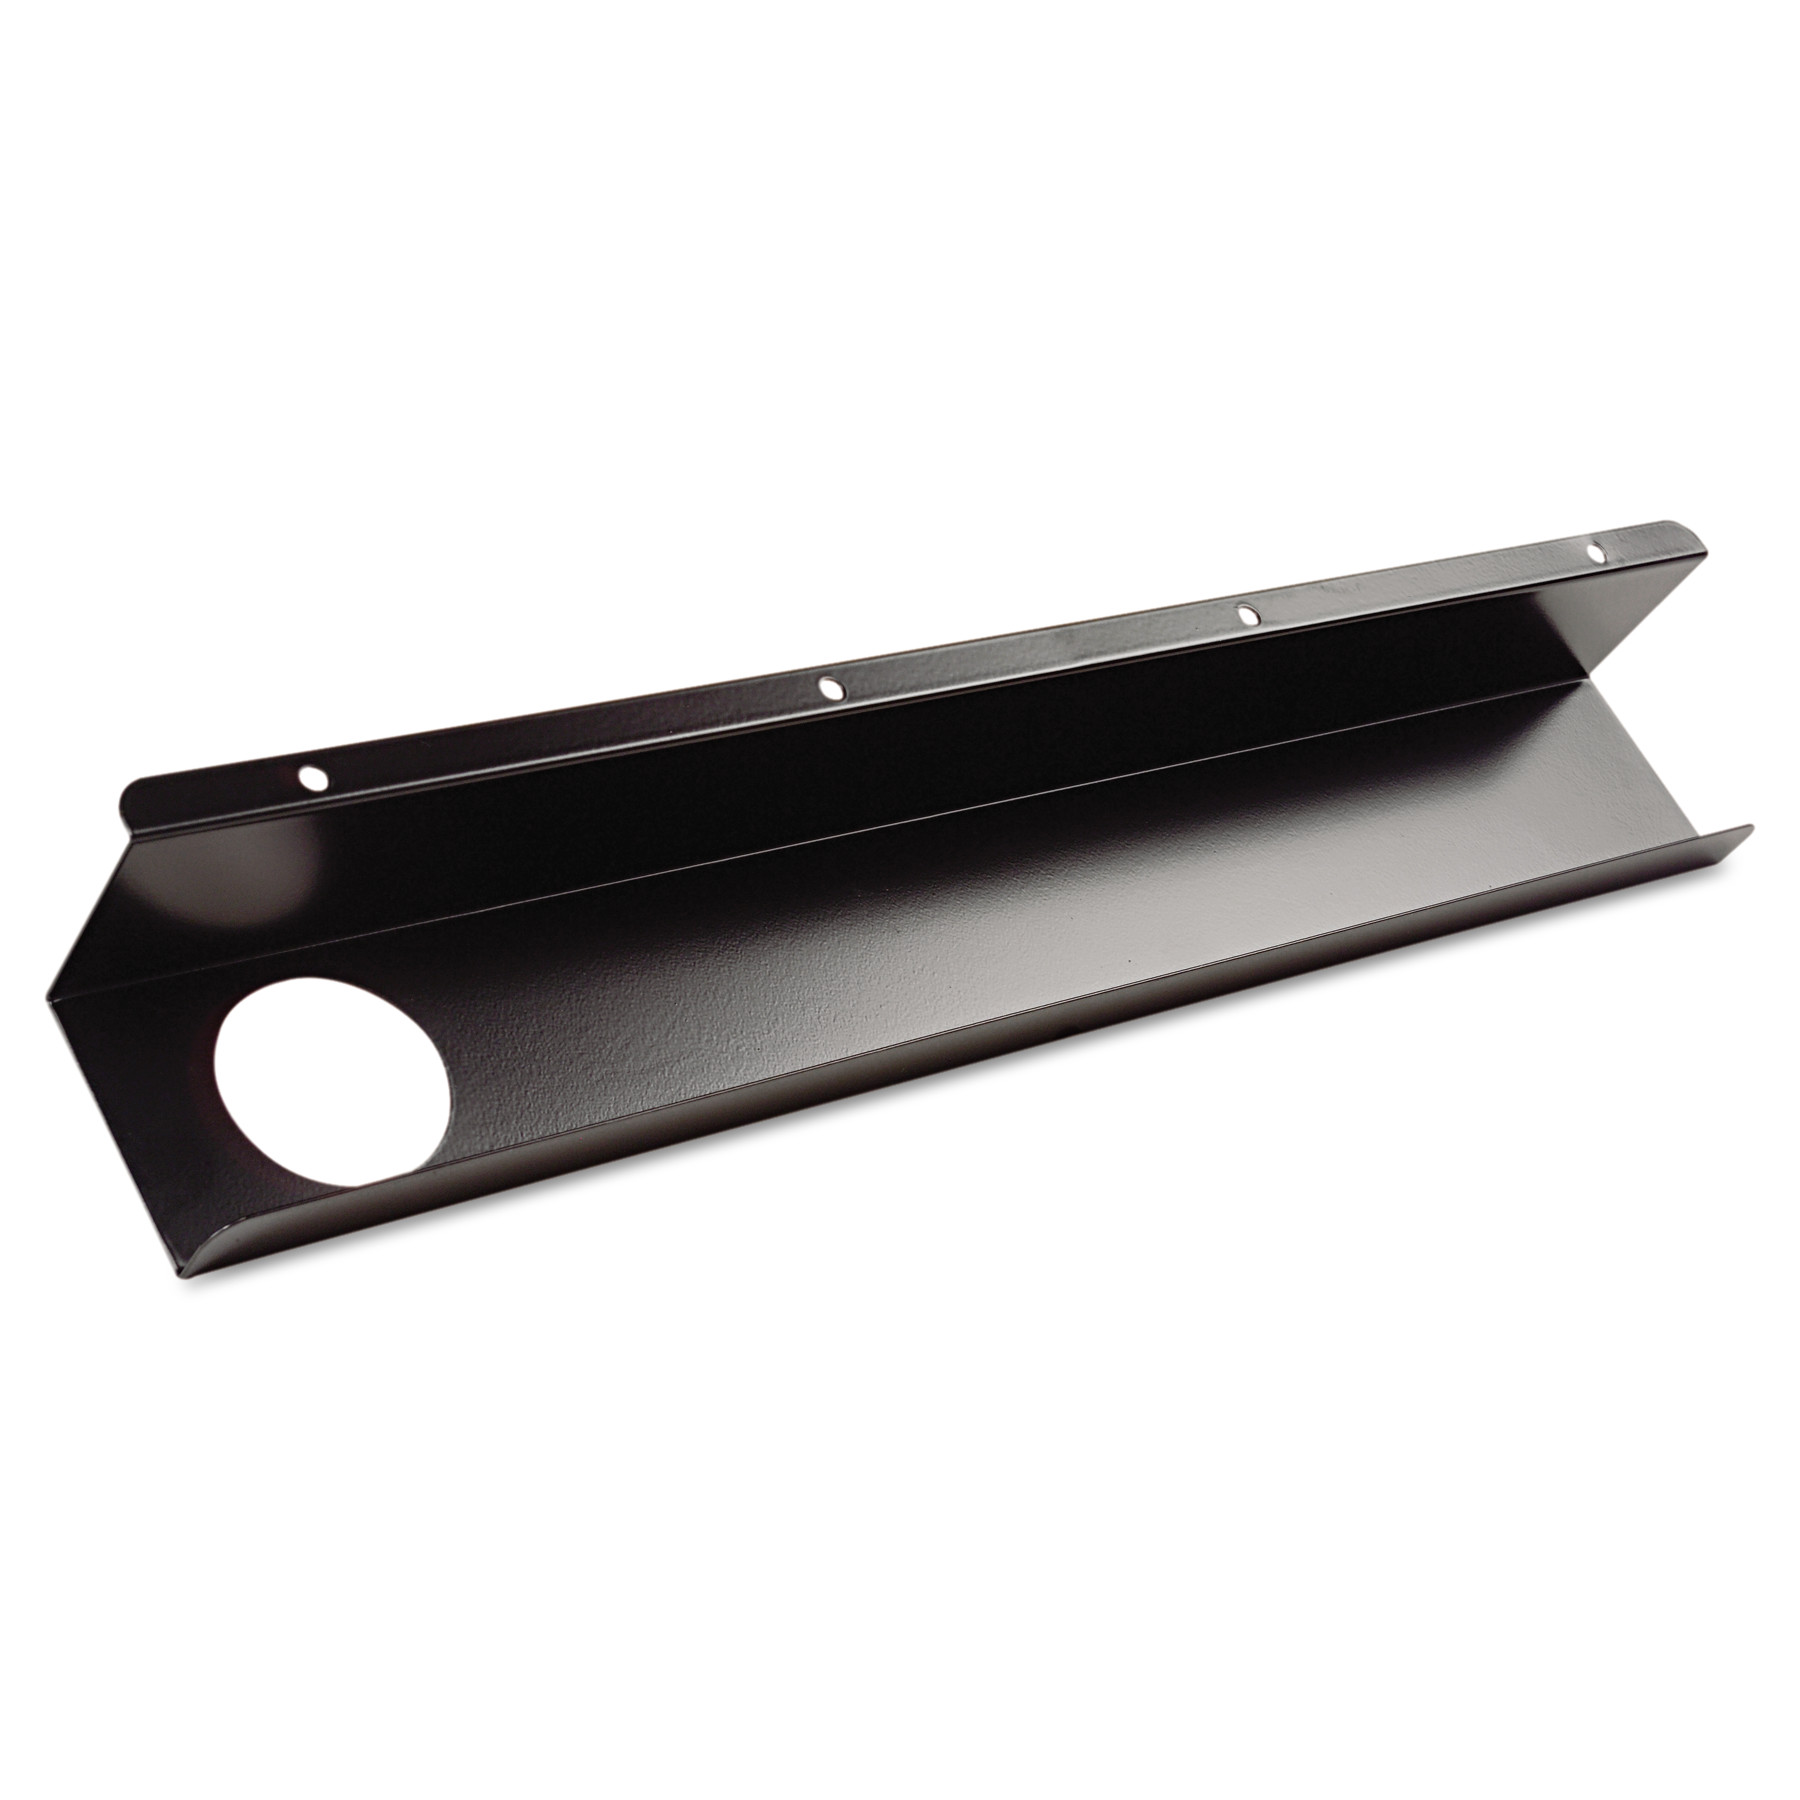 BALT Split-Level Training Table Cable Tray, Metal, 21-1/2w x 3d, Black, 2/Pack - image 1 of 2